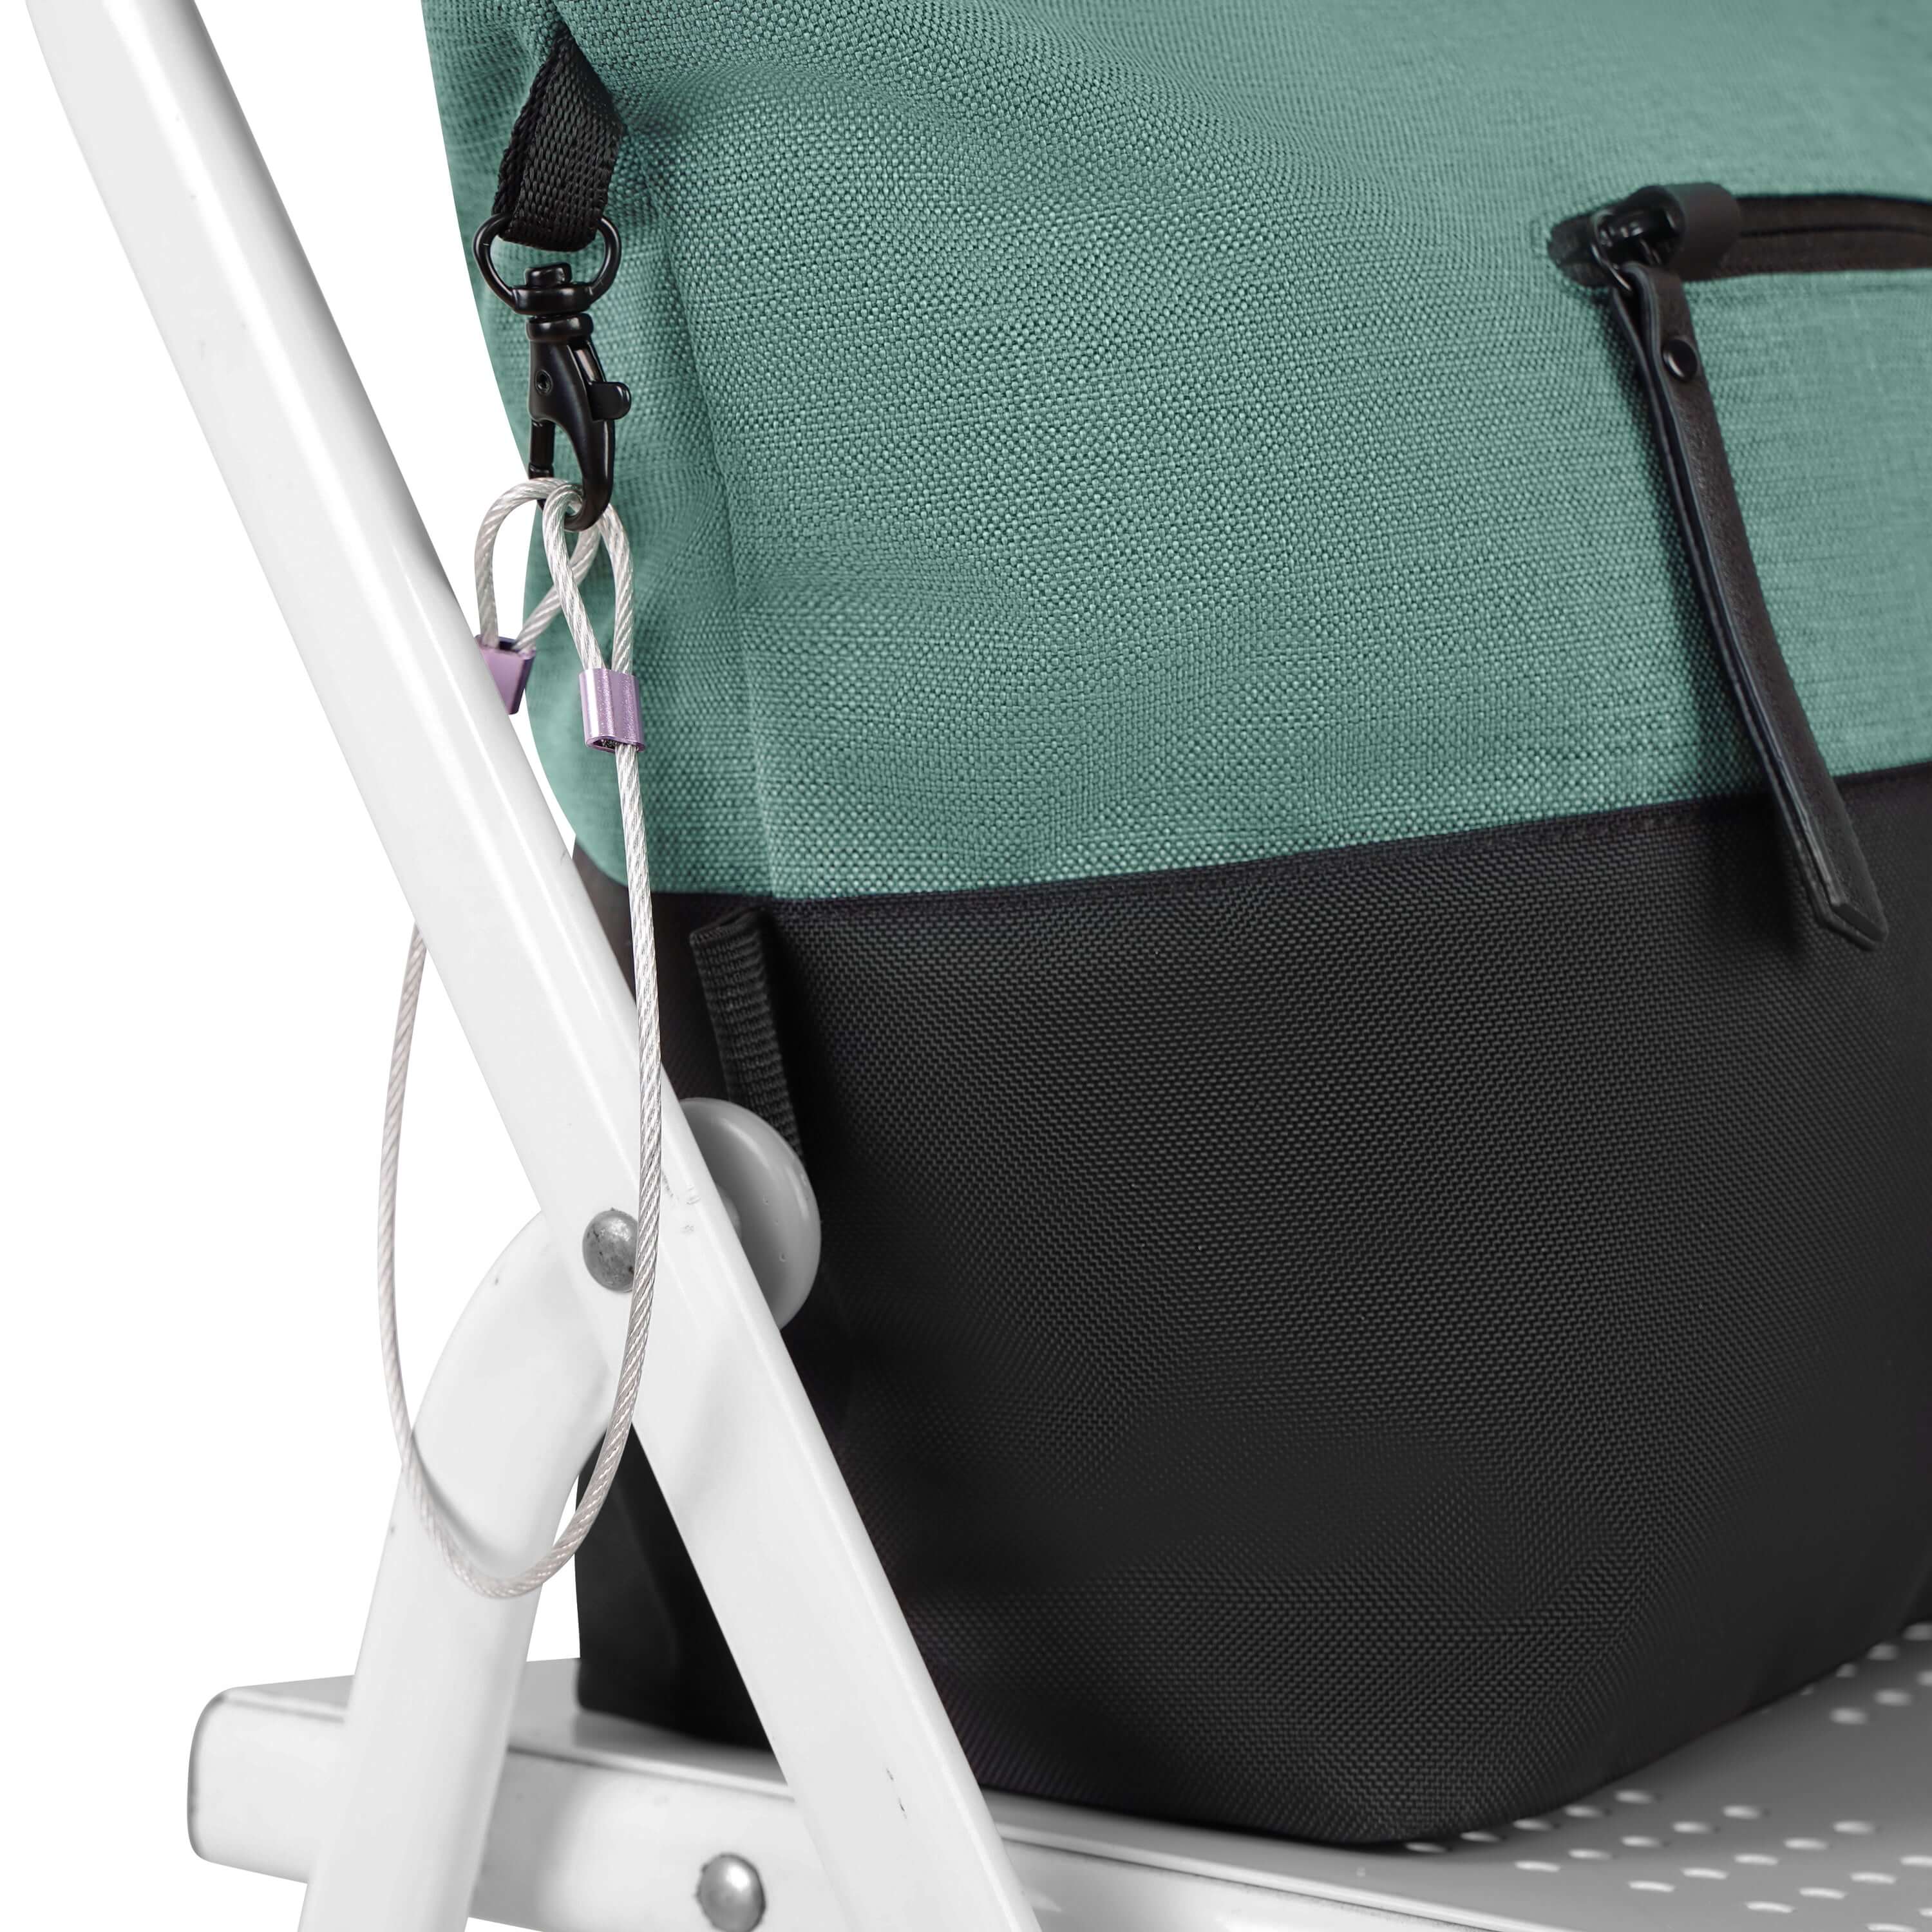 Close up side view of Sherpani's Anti-Theft tote the Cali AT in Teal. The bag is sitting on a white chair and is secured to the chair by the wire-loop chair lock.